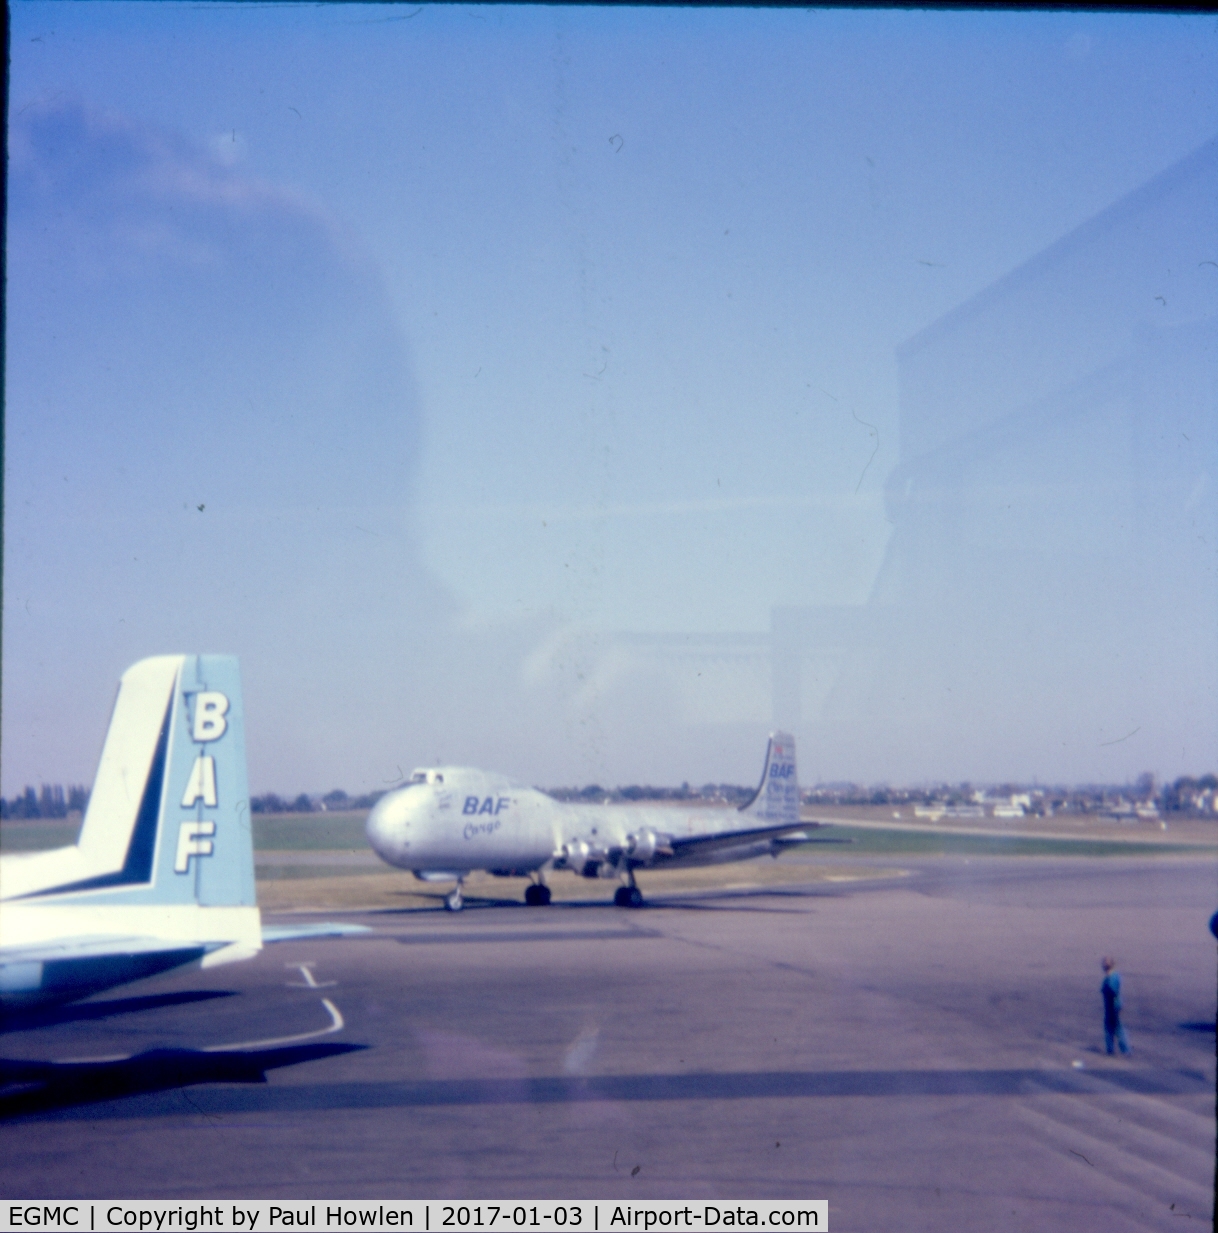 London Southend Airport, Southend-on-Sea, England United Kingdom (EGMC) - Southend Apron scene C.1976 with G-ASDC 'Plain Jane' and tail of Handley Page Herald 